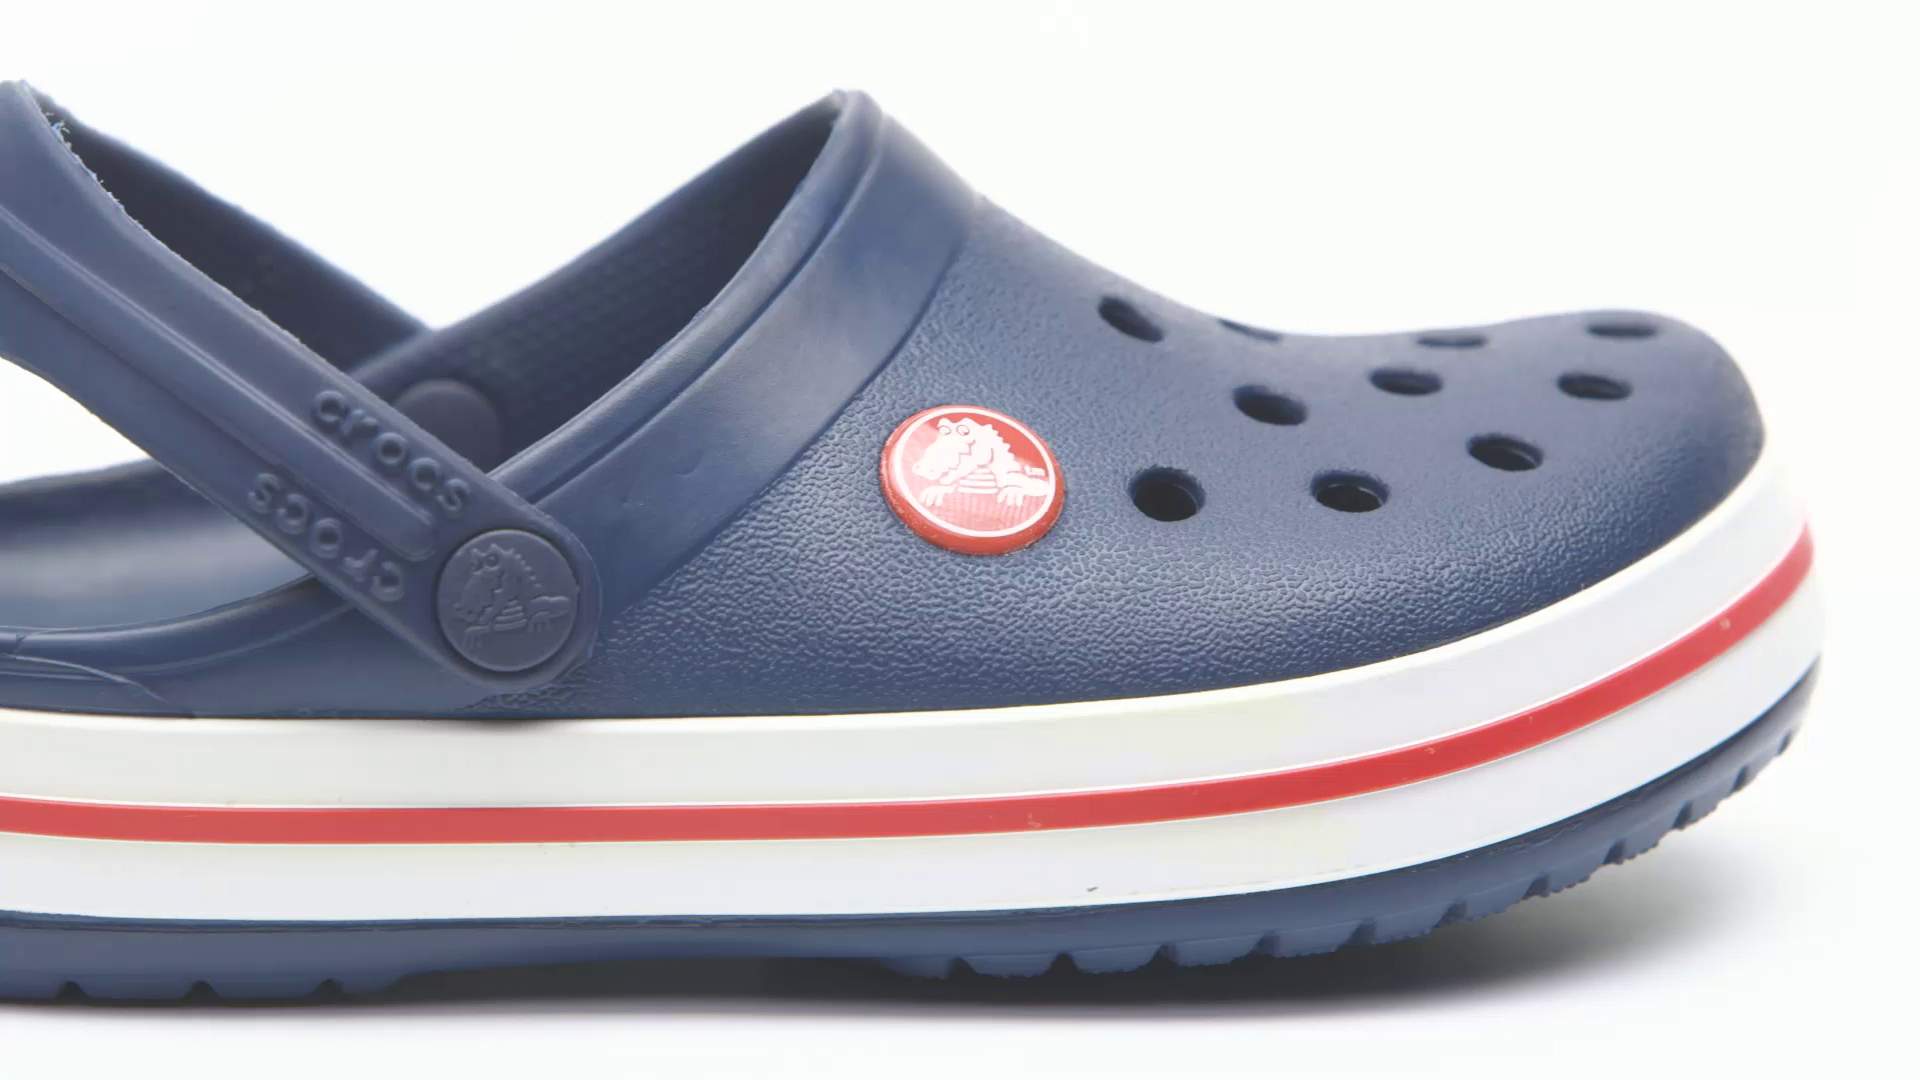 generic crocs for toddlers